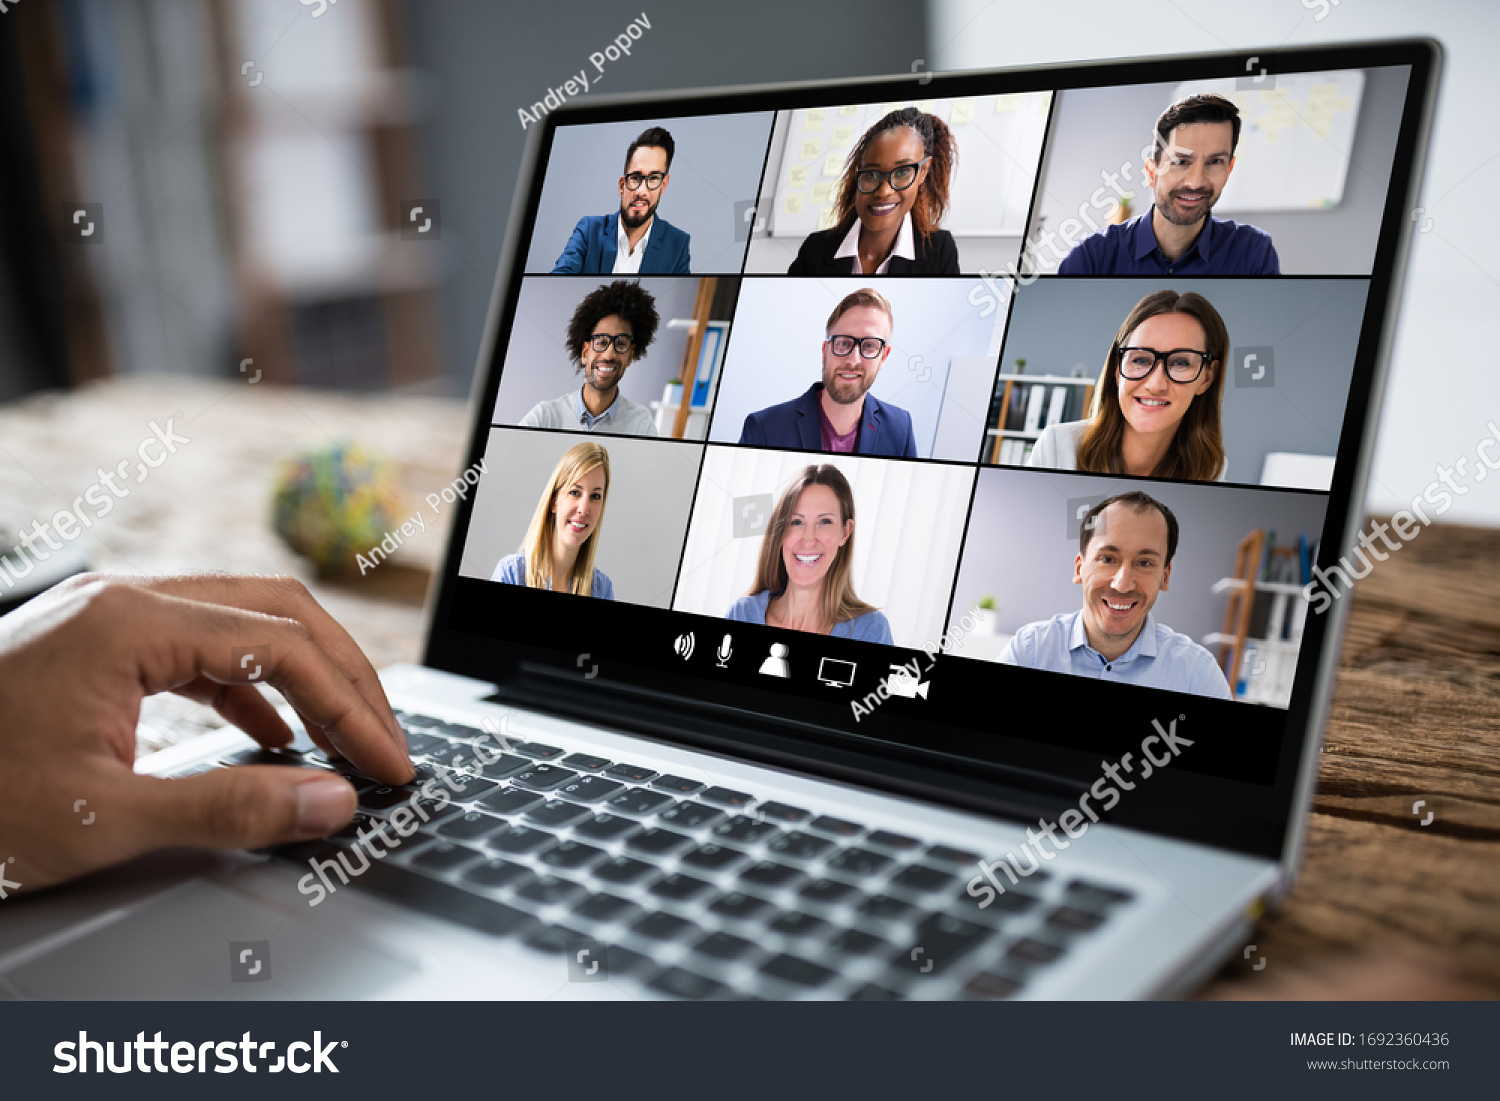 Man Working From Home Having Online Group Videoconference On Laptop #1692360436